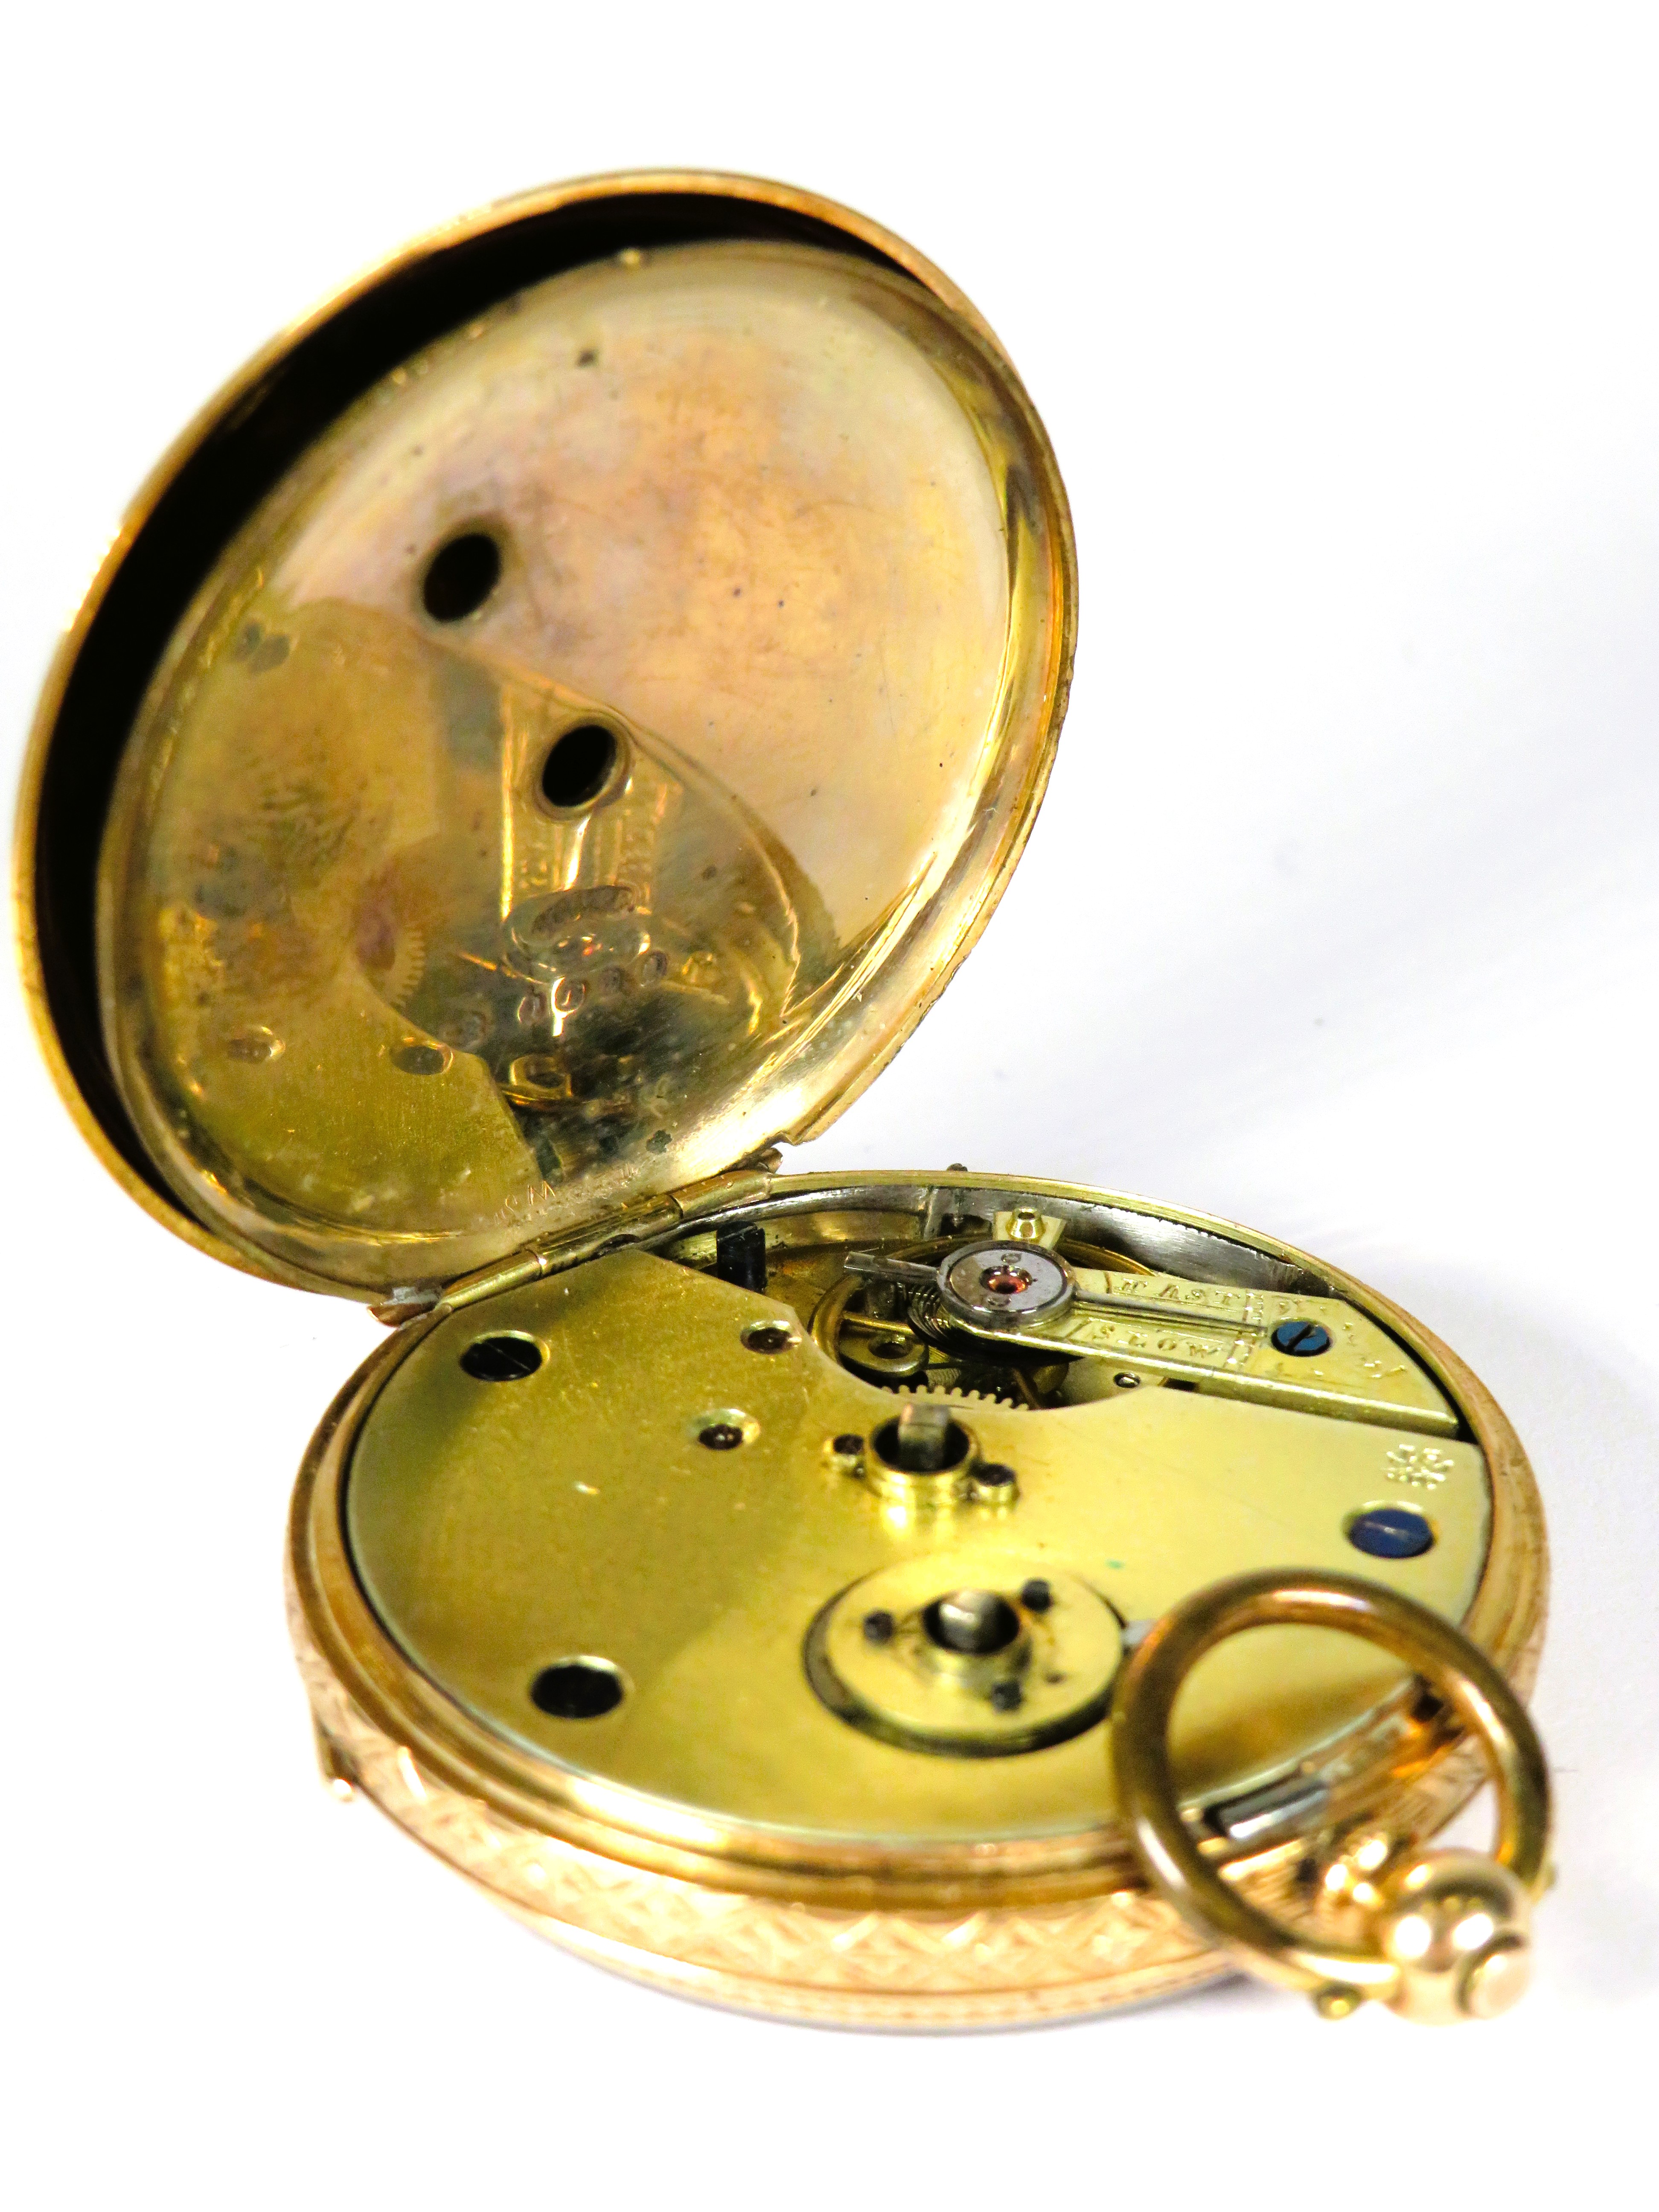 14ct Yellow Gold Bodied Pocket watch with Gold tone back and front. Comes with two keys, intermitten - Bild 5 aus 6